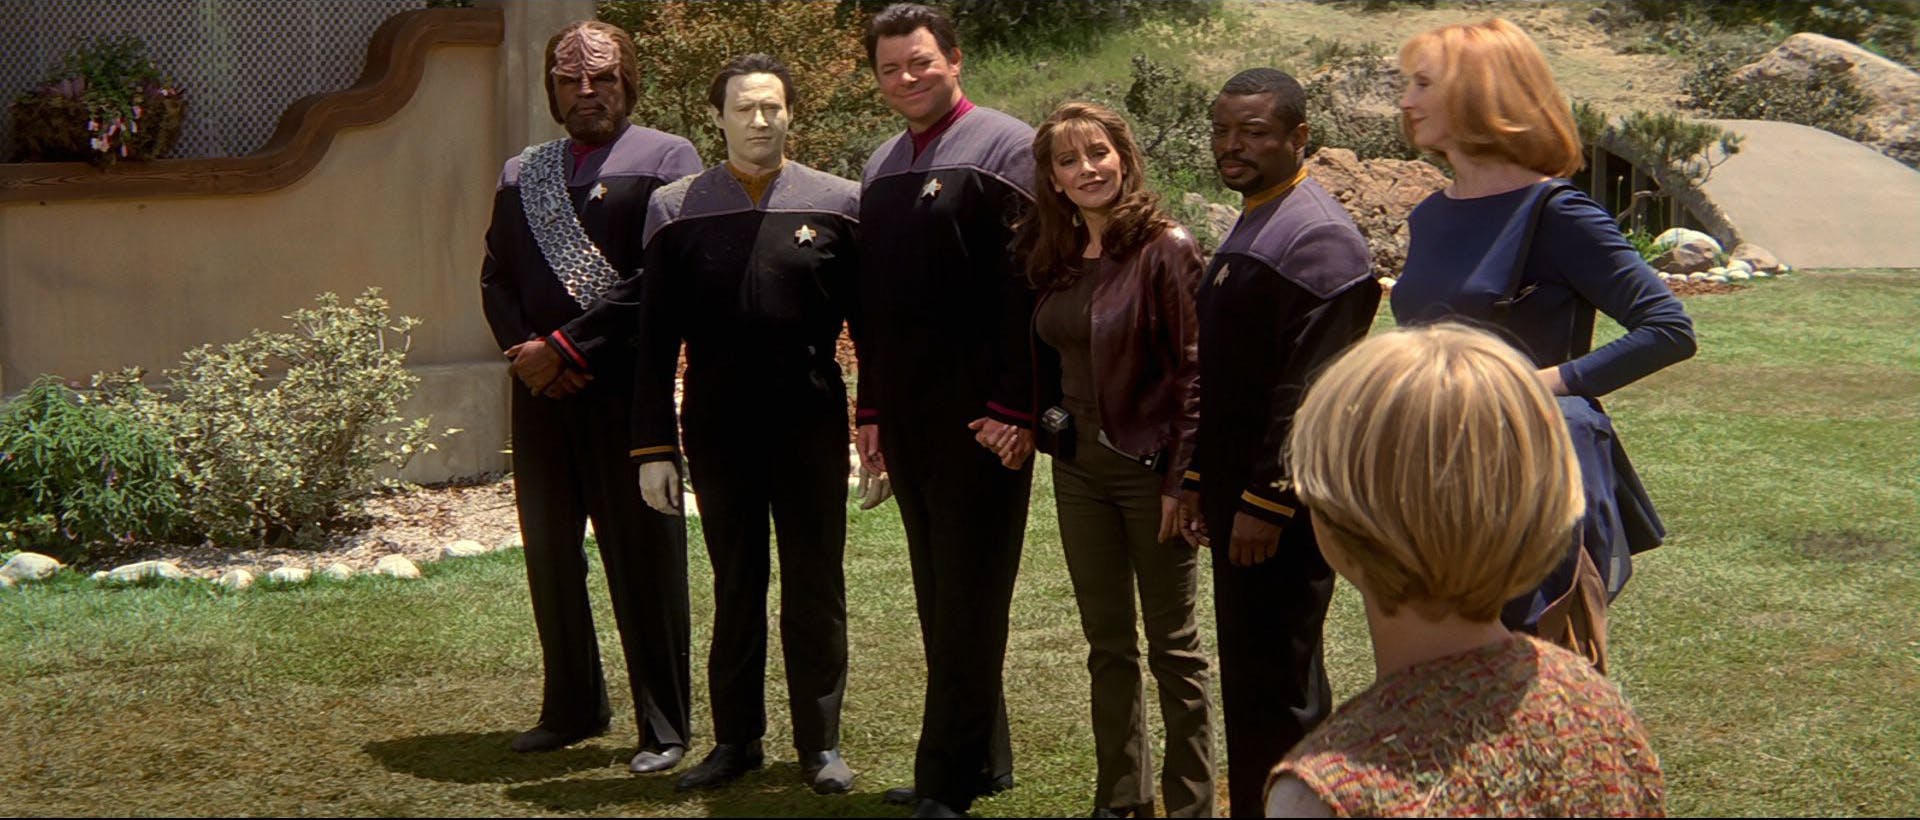 On the surface of Ba'ku, Worf, Data, Will Riker holding hands with Deanna Troi, Geordi La Forge, and Beverly Crusher admiral the locals in Star Trek: Insurrection